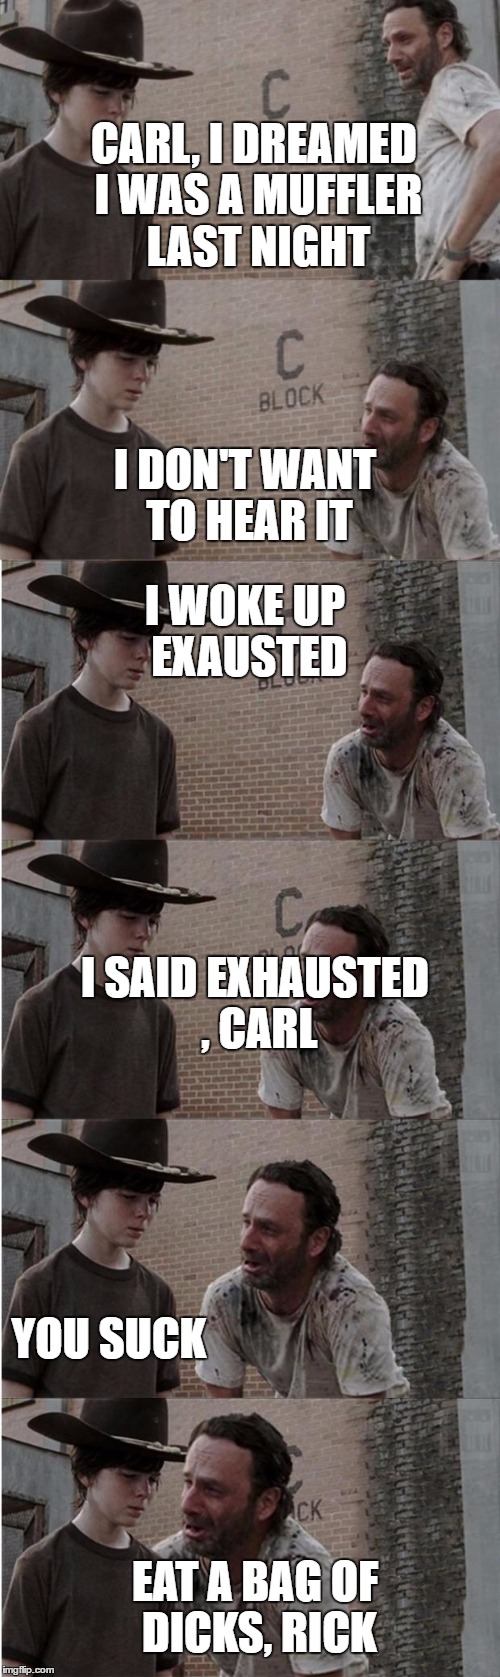 Rick and Carl Longer | CARL, I DREAMED I WAS A MUFFLER LAST NIGHT; I DON'T WANT TO HEAR IT; I WOKE UP EXAUSTED; I SAID EXHAUSTED , CARL; YOU SUCK; EAT A BAG OF DICKS, RICK | image tagged in memes,rick and carl longer | made w/ Imgflip meme maker